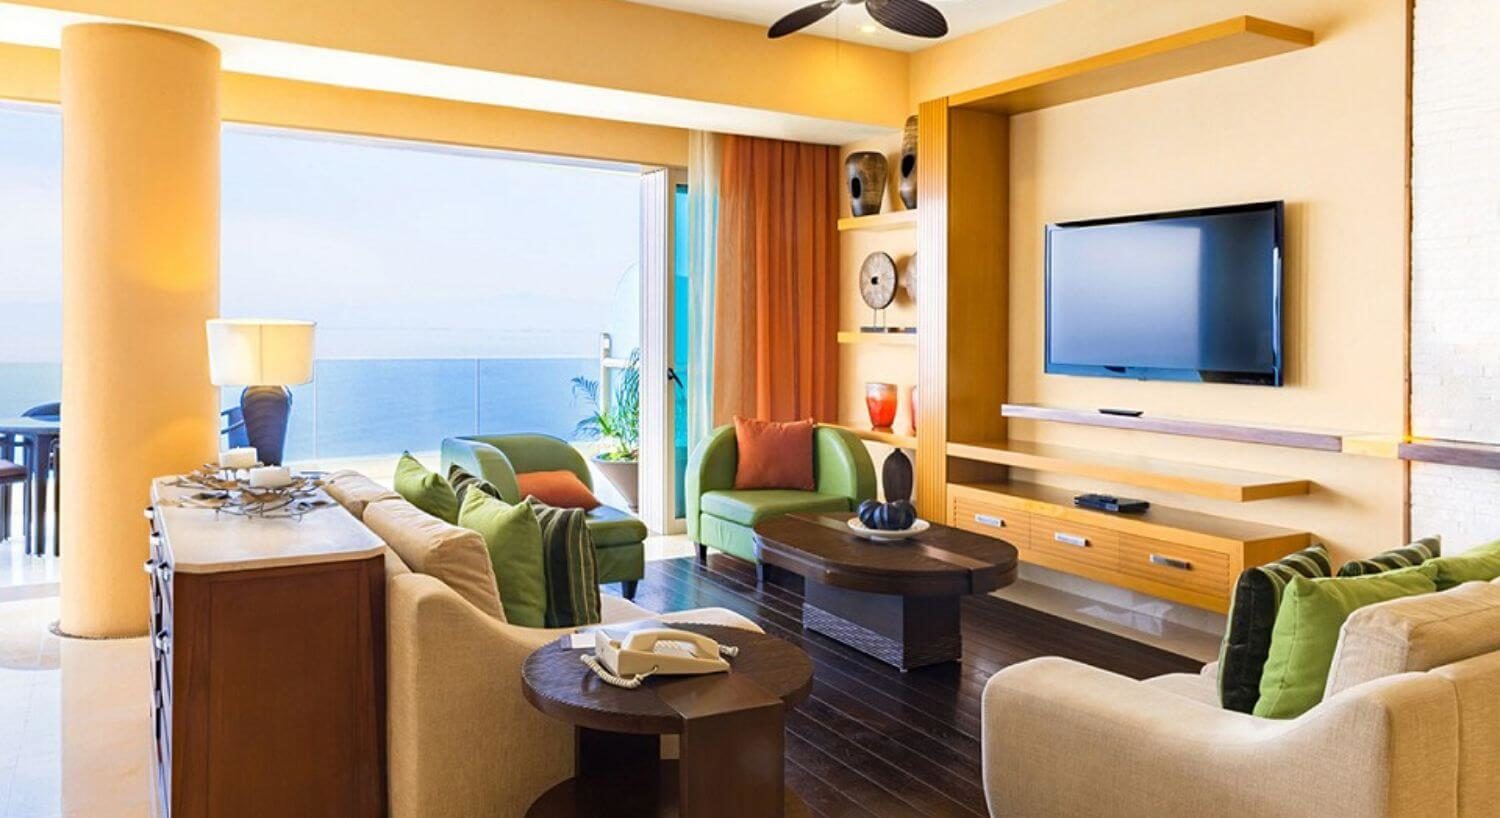 A living room with tan and green furniture with orange, brown and green throw pillows, wood coffee table and side tables, a flat screen TV and sliding doors open to a patio with ocean views.